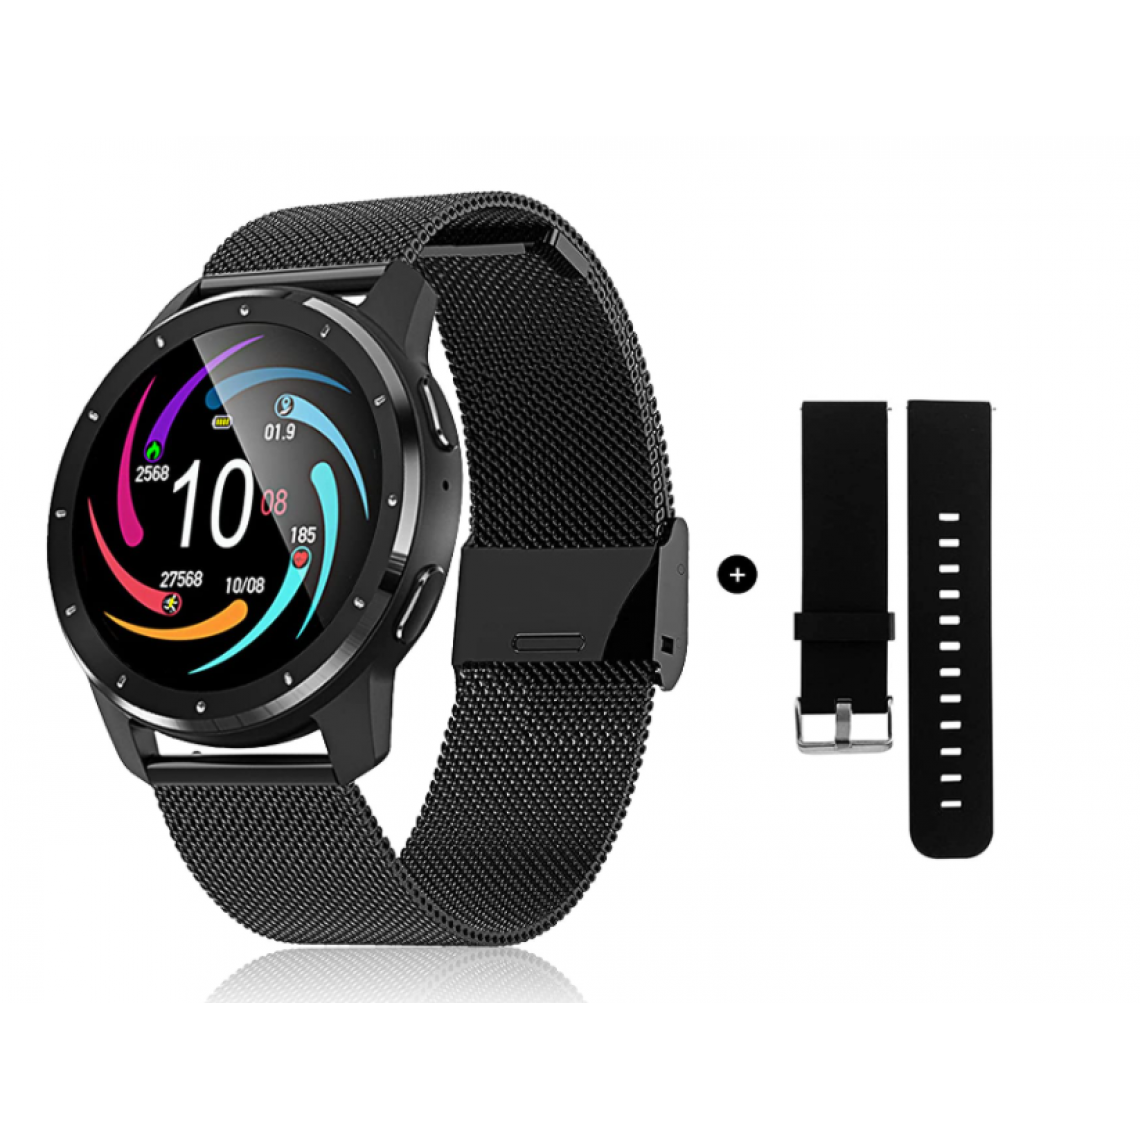 Chronotech Montres - Chronus 2022 Women's Smart Watch, Activity Tracker and Smart Watch with Heart Rate/Blood Pressure/Sleep Monitor, Waterproof with Text and Callï¼blackï¼ - Montre connectée